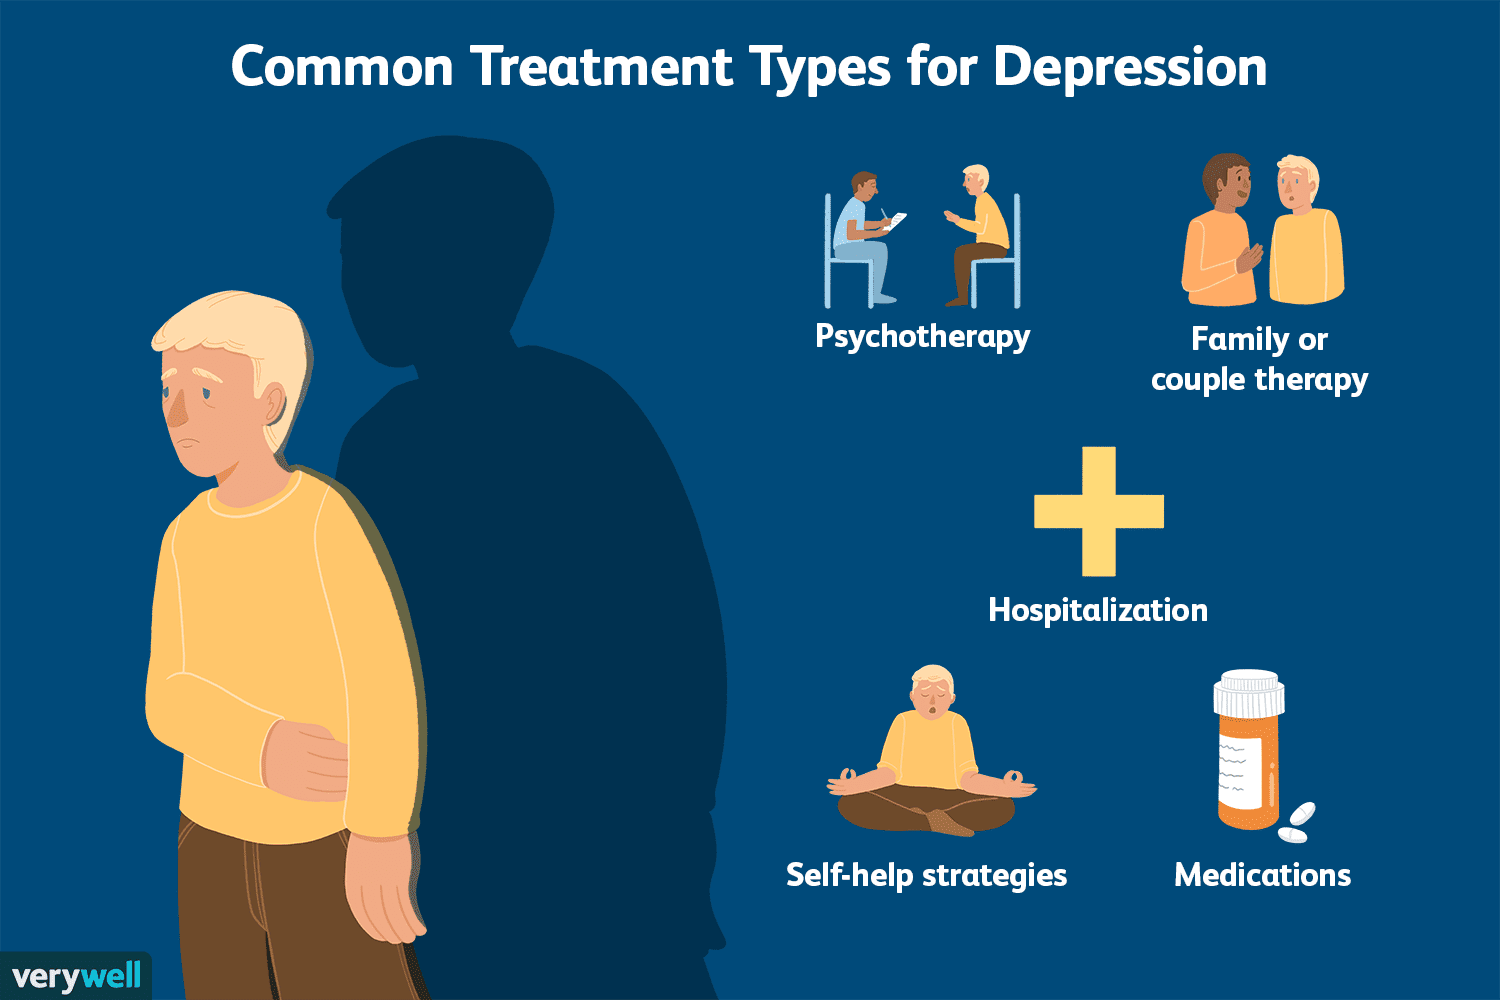 An Overview of the Treatments for Depression